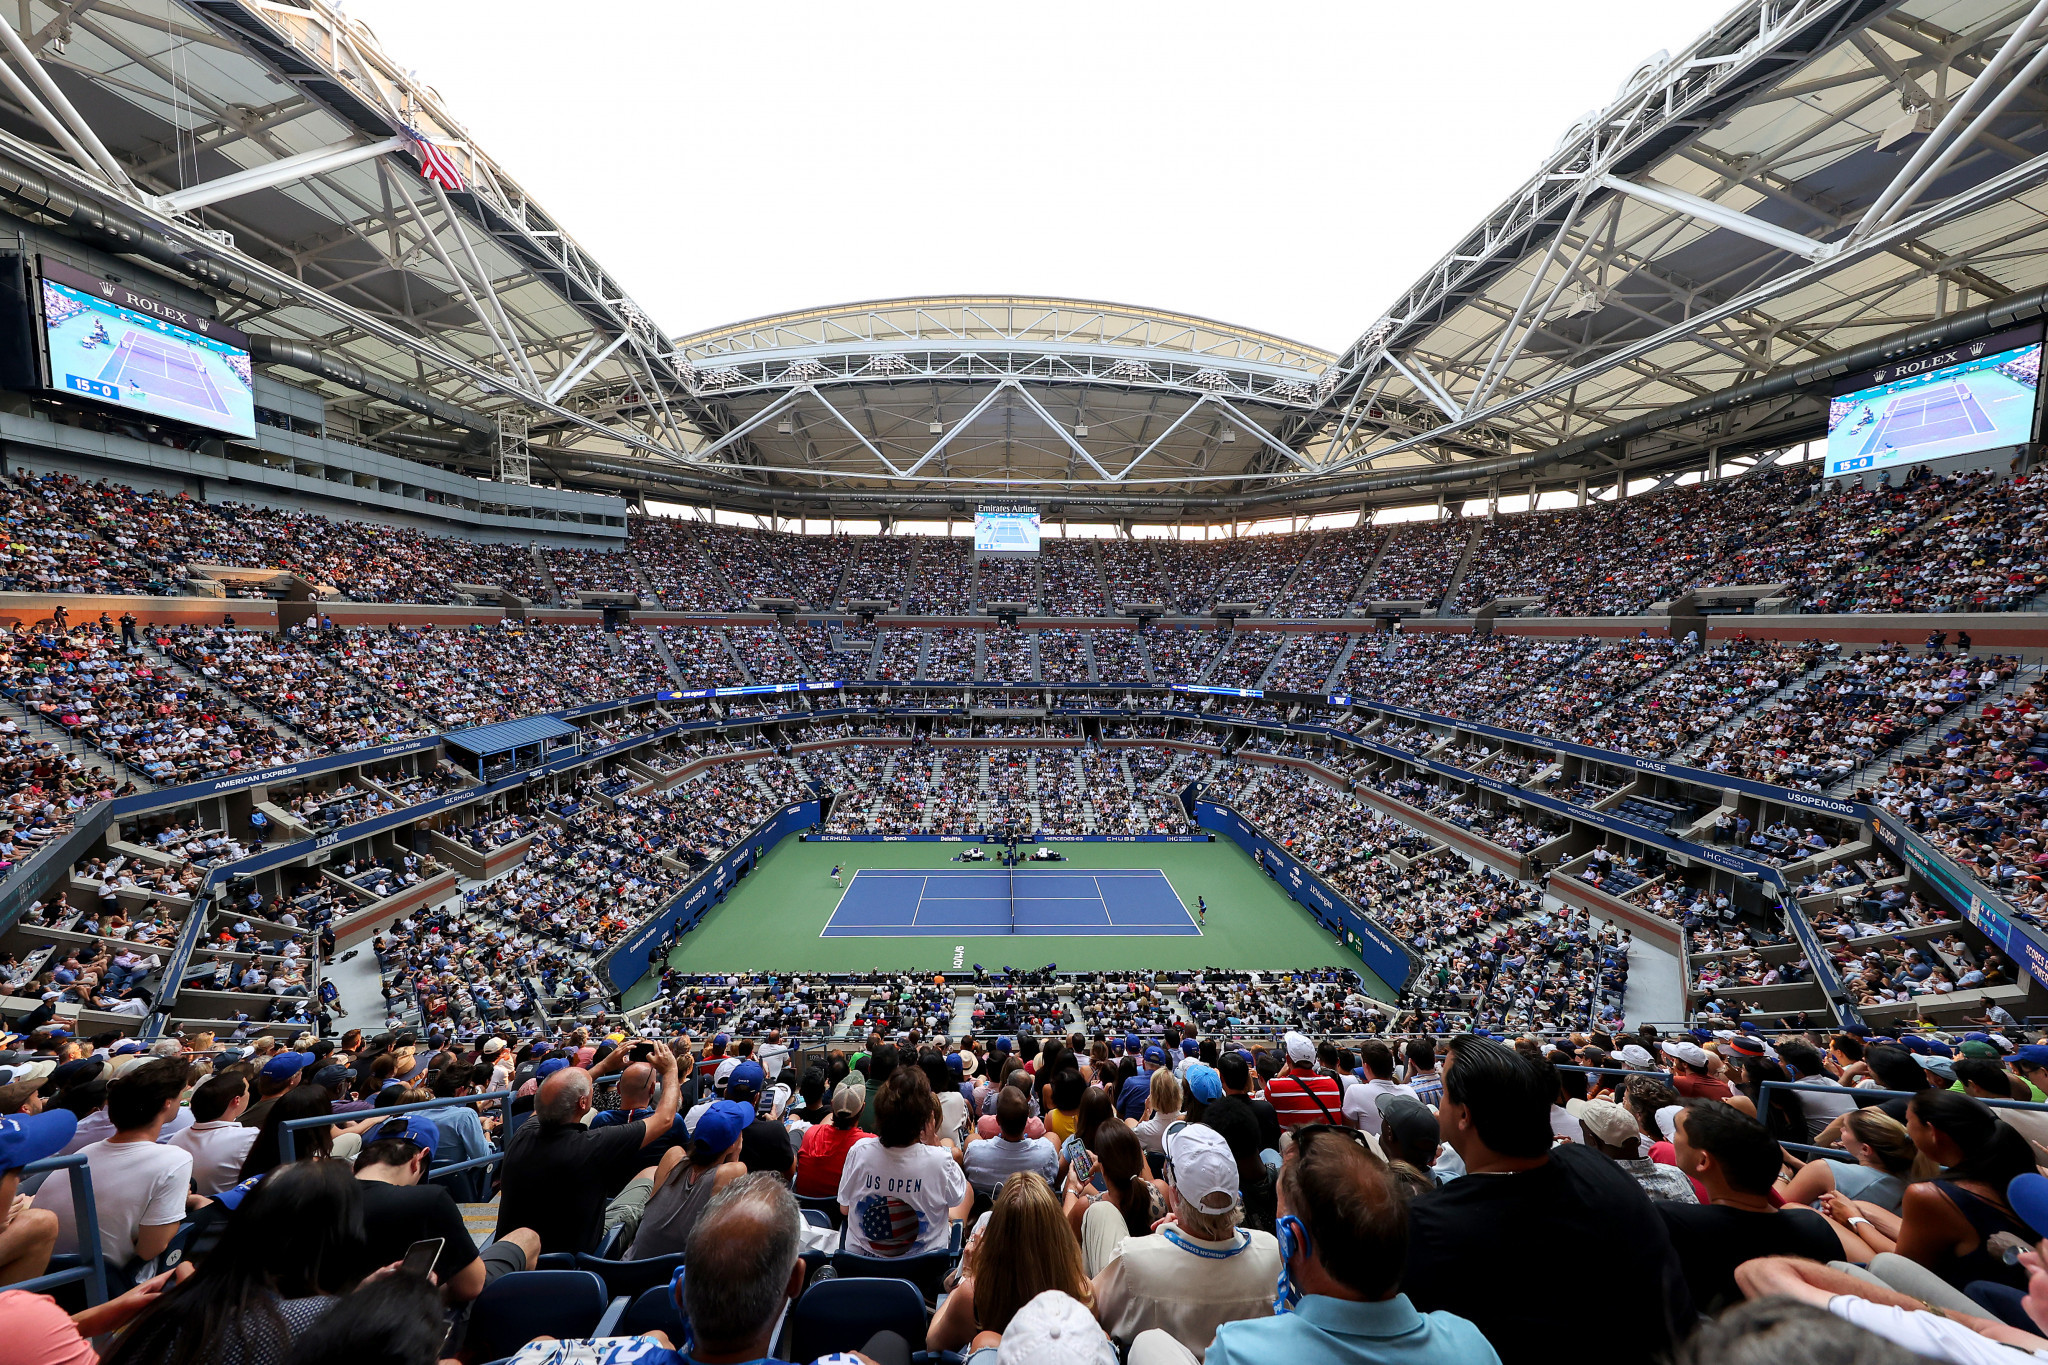 The 2021 US Open opened fans back into the Arthur Ashe Stadium at the Billie Jean King National Tennis Center after a spectator-less 2020 event, though they had to prove they had one dose of the COVID-19 vaccine to gain entry ©Getty Images